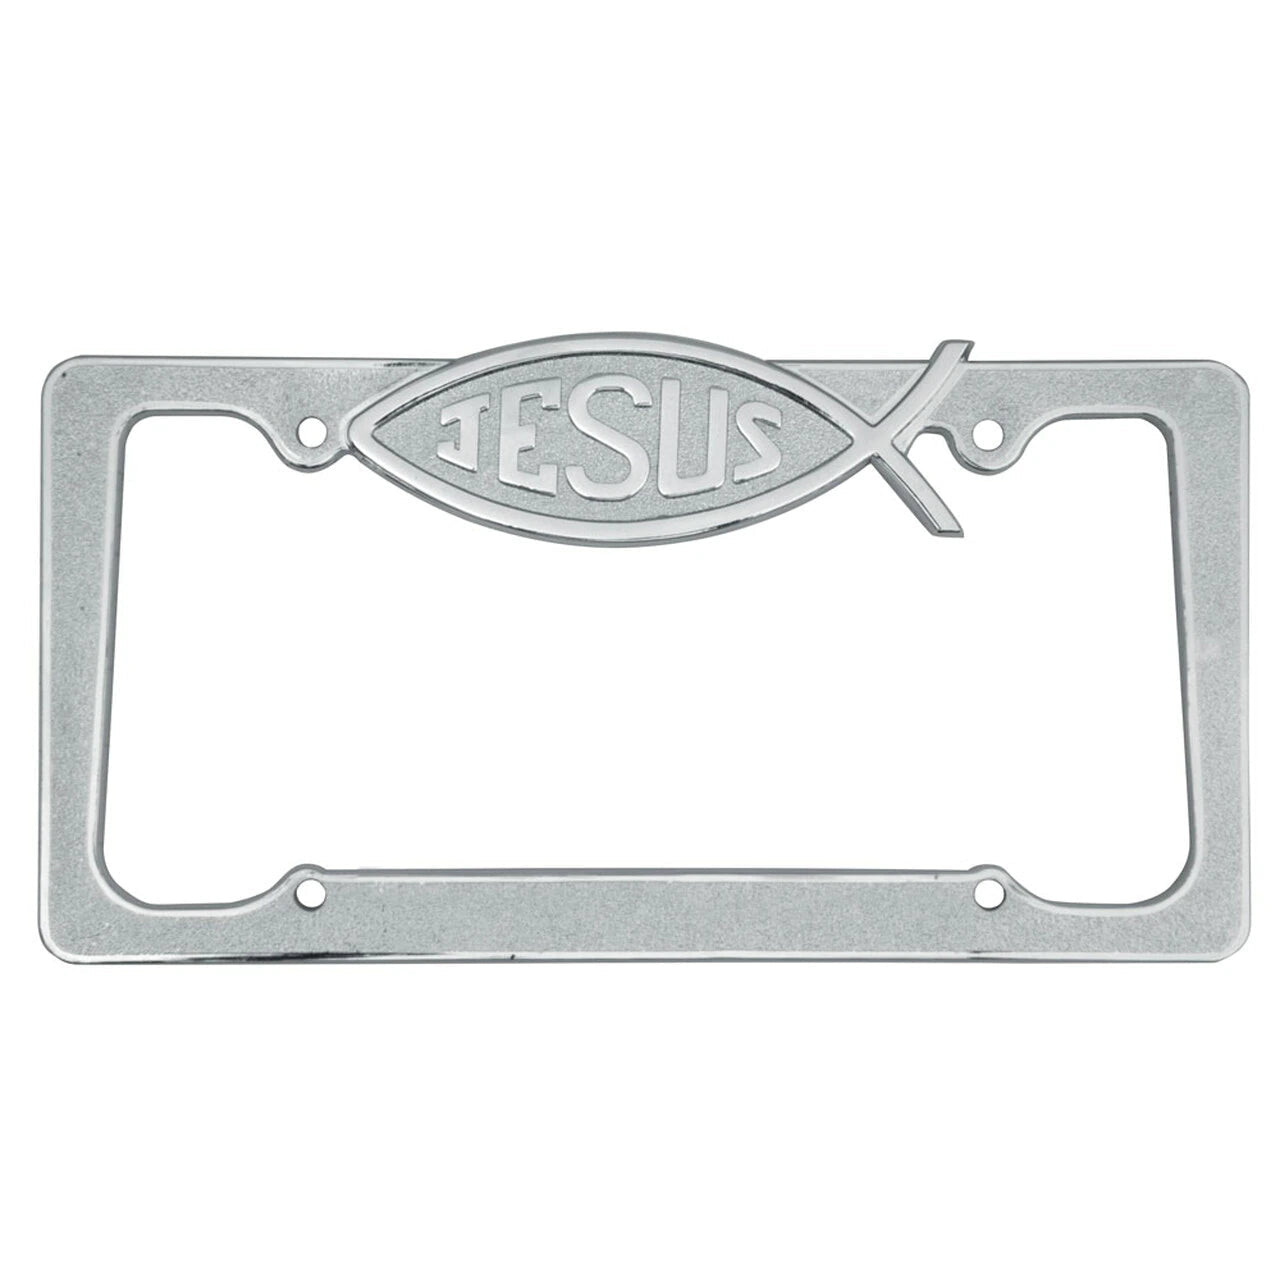 Chrome Plated Rust-Proof Die-Cast Stainless Metal License Plate Frame/Holder Universal Size - Jesus Fish (Pack of 2) - 2-Pack